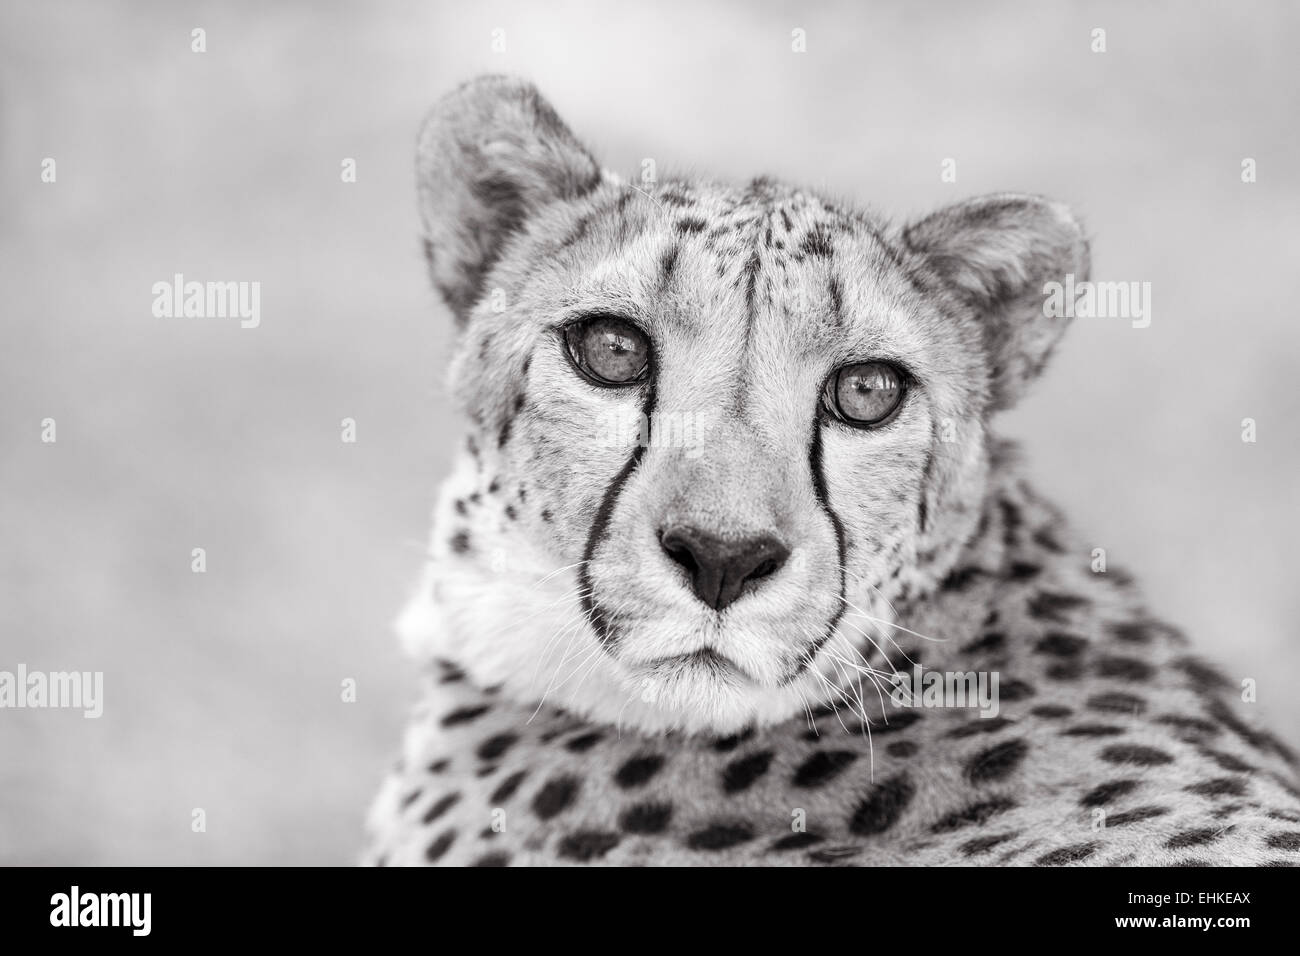 A black and white portrait of a cheetah, Namibia. Stock Photo